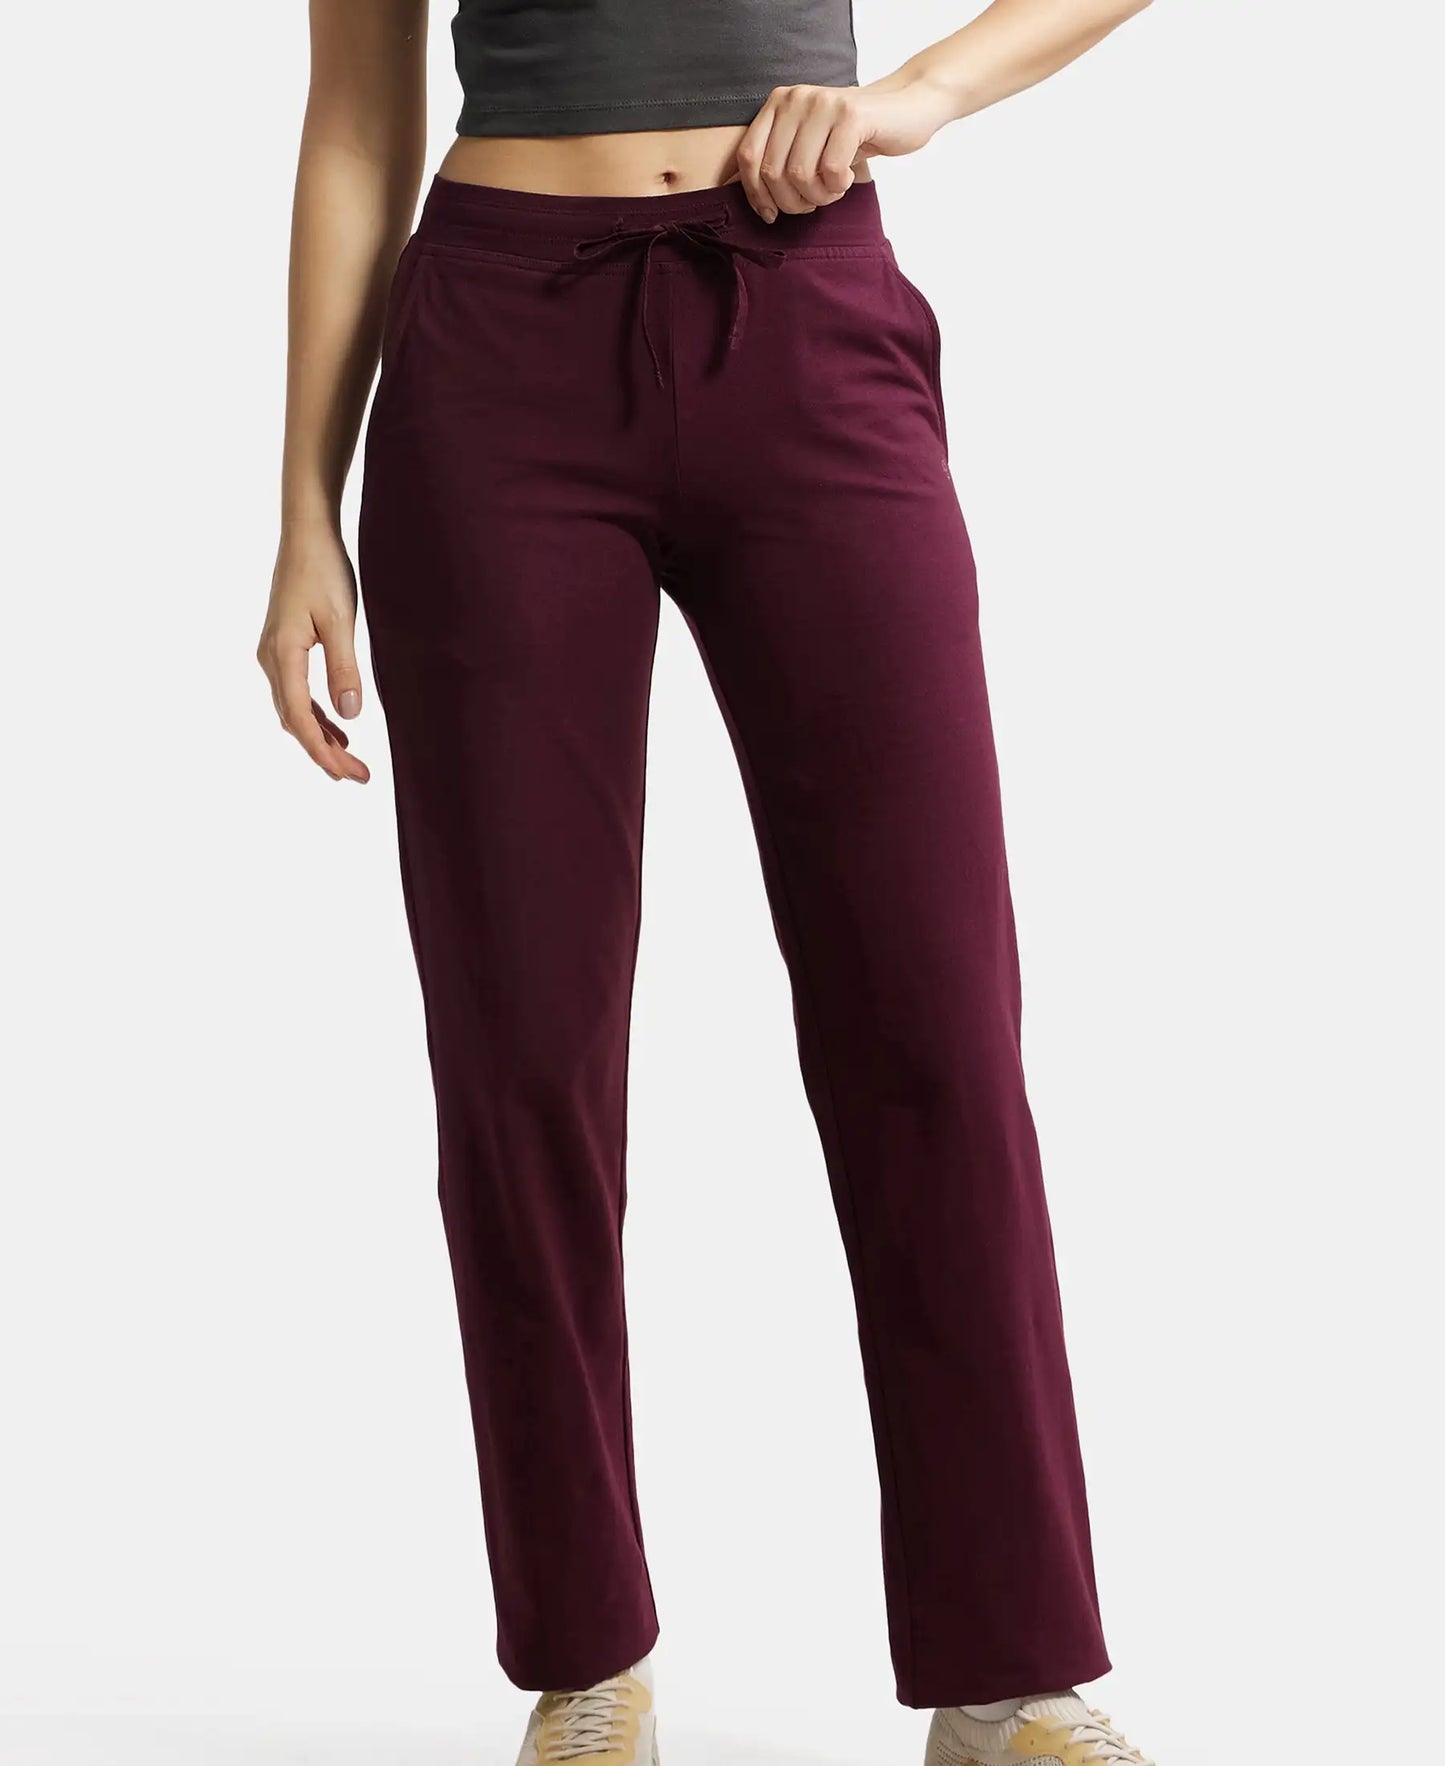 Super Combed Cotton Elastane Relaxed Fit Trackpants With Side Pockets - Wine Tasting-5